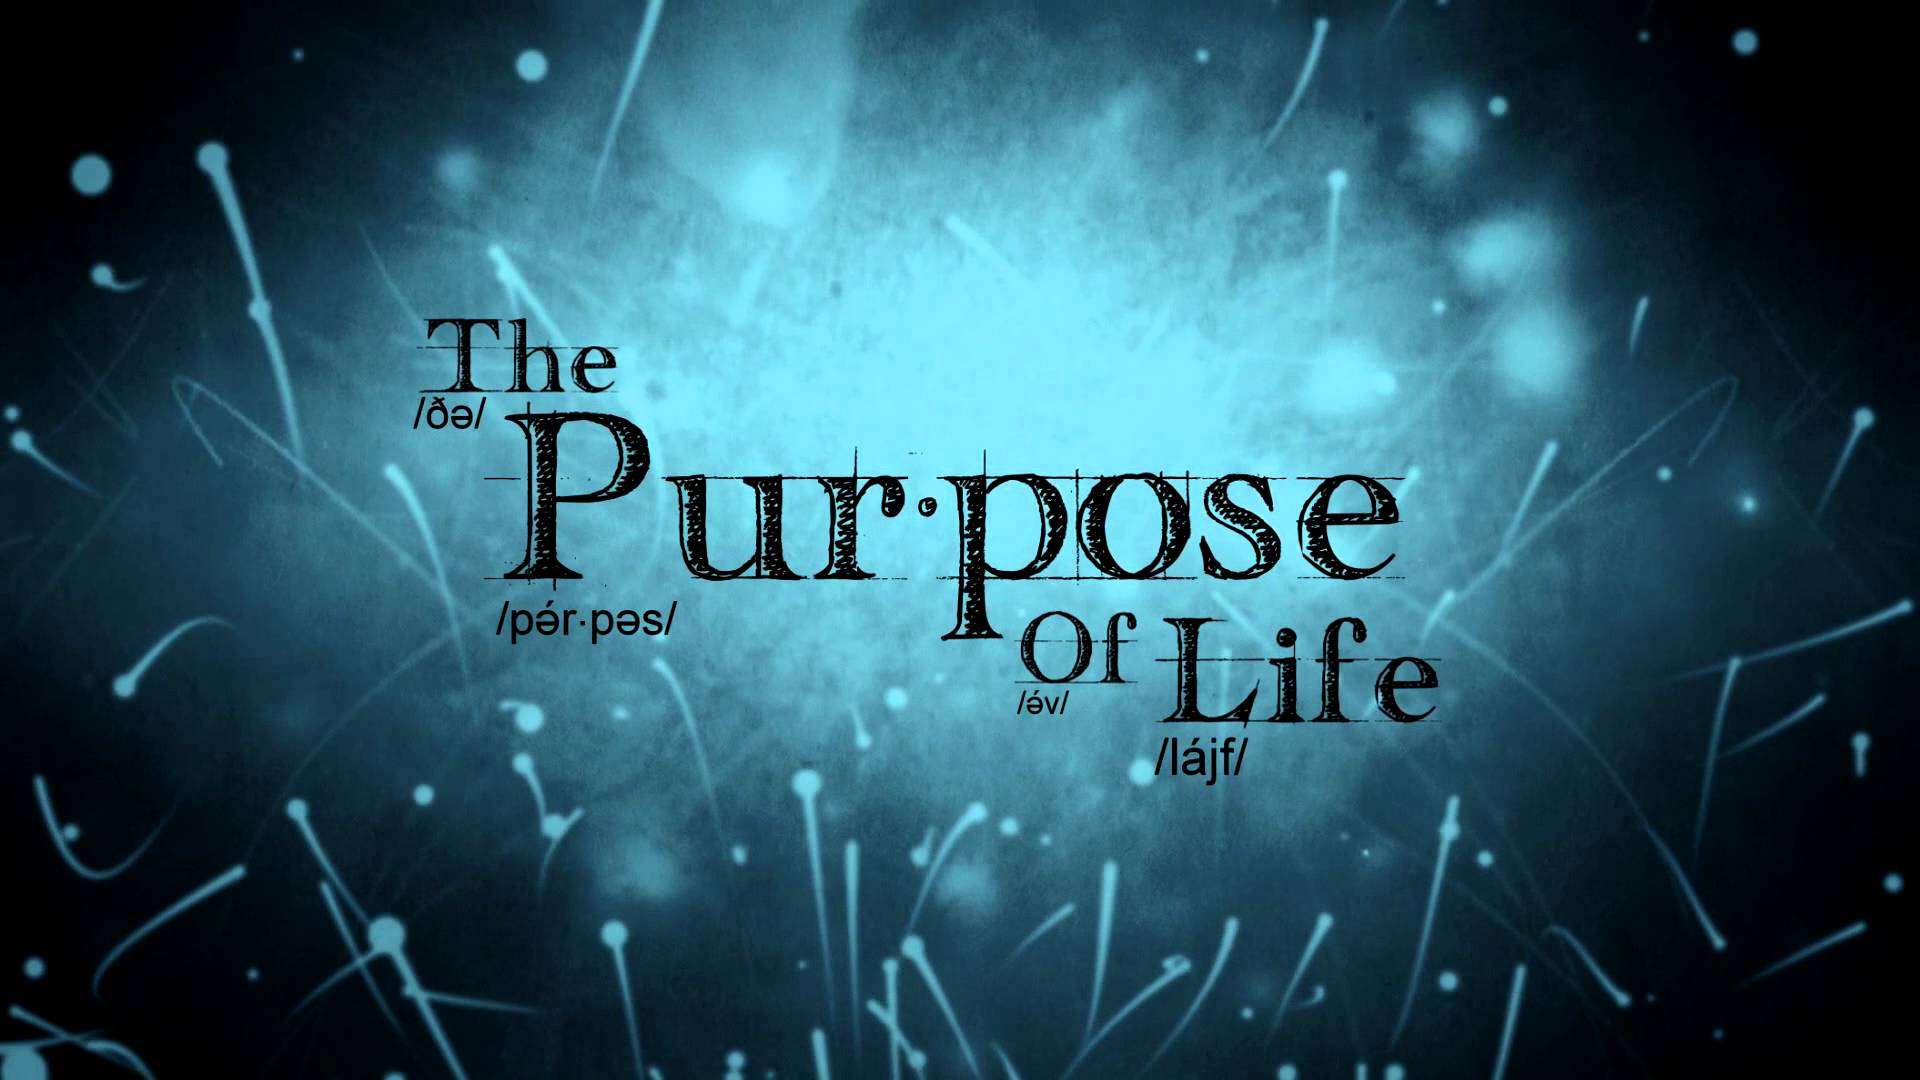 Purpose of life is. Life purpose. What is the purpose of Life. Purpose красивая надпись. Life the Life.